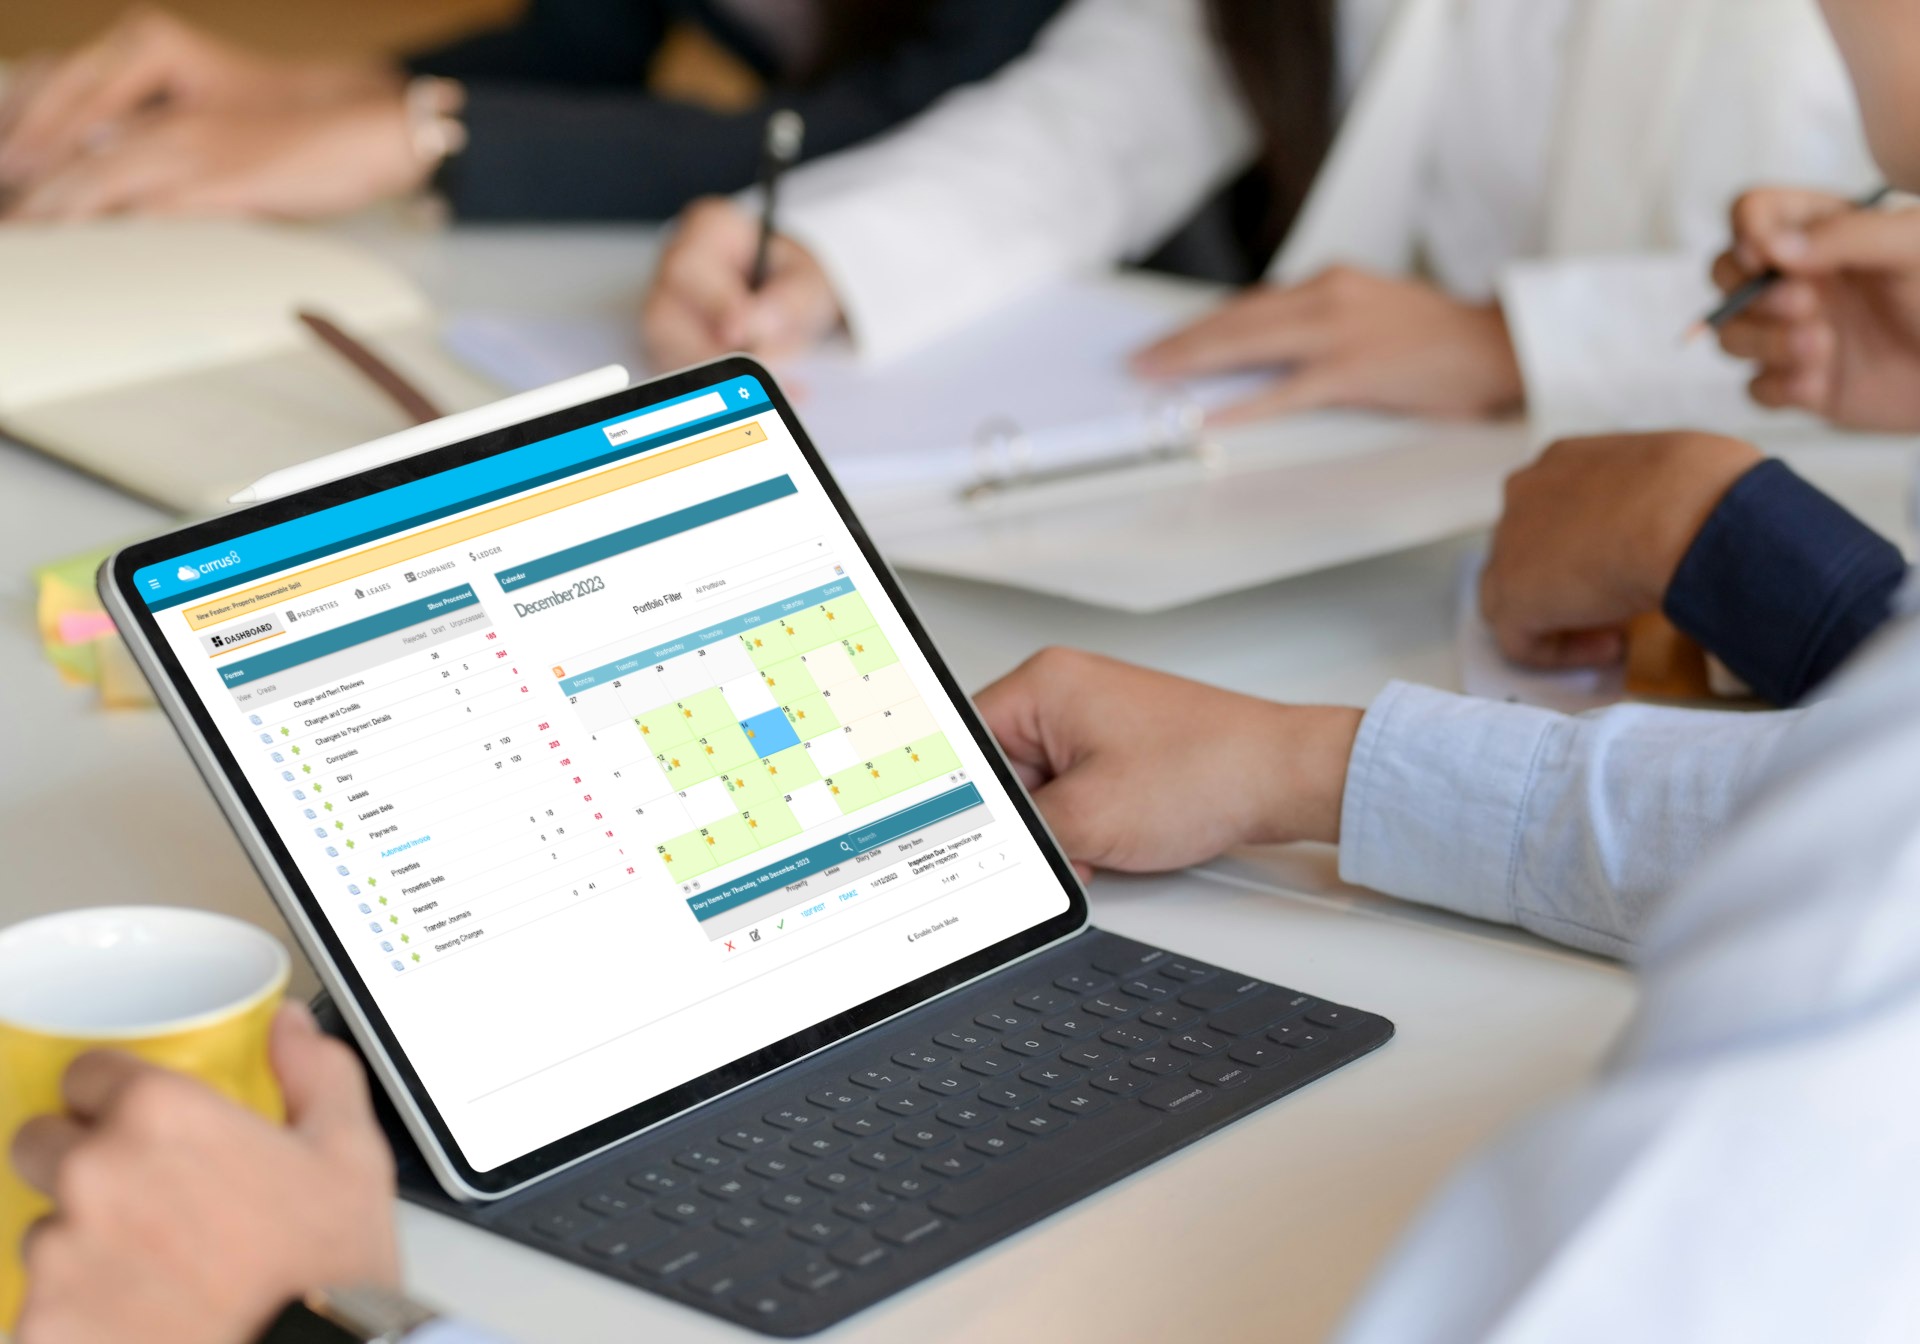 Commercial property management software for your agency or business. Never miss a critical date again. Fully customisable dairy management, keep a running commentary for each task. If you go on leave, others will have insight into the task’s progress.